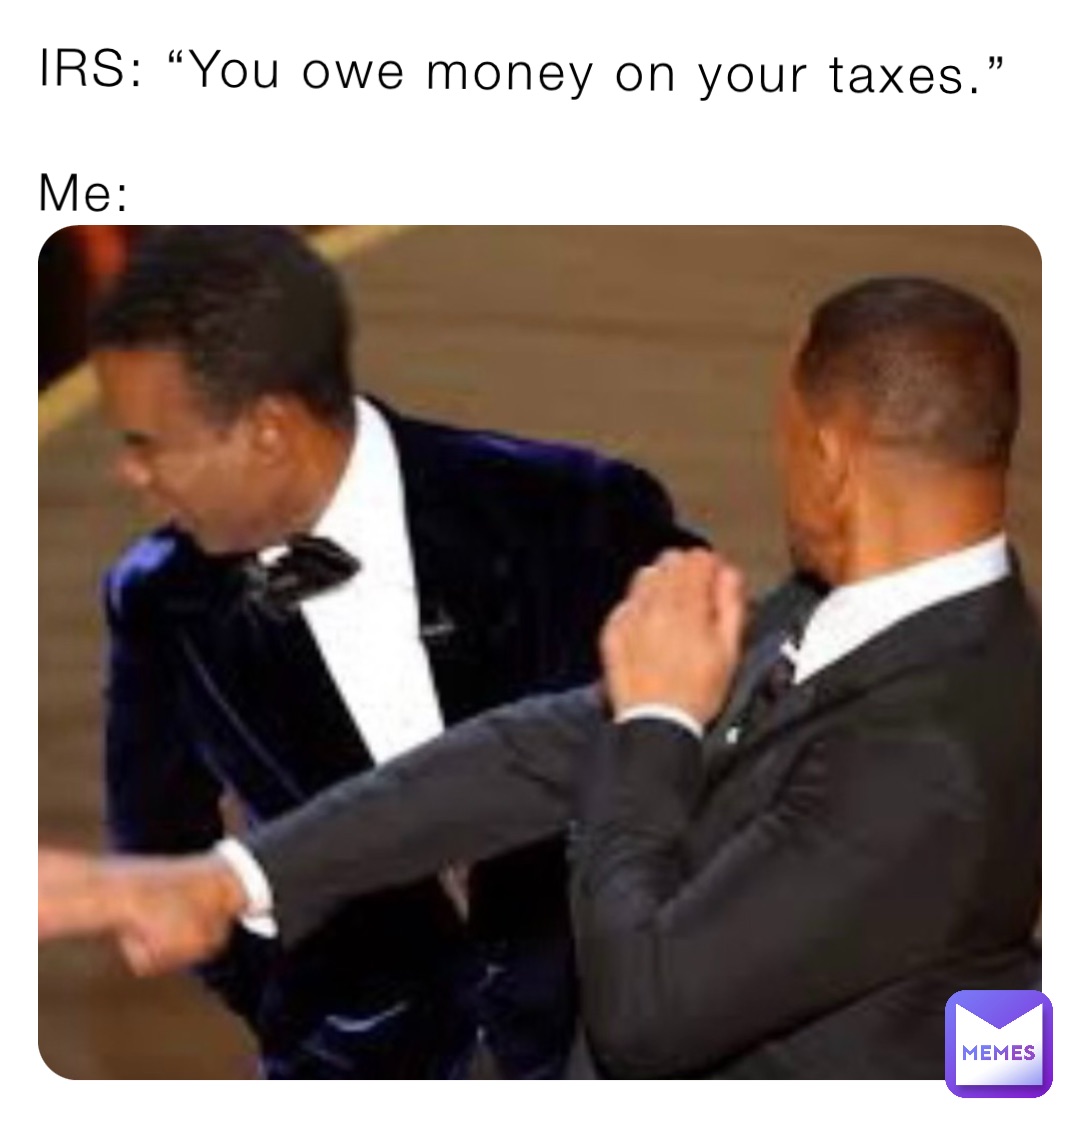 IRS: “You owe money on your taxes.”

Me: